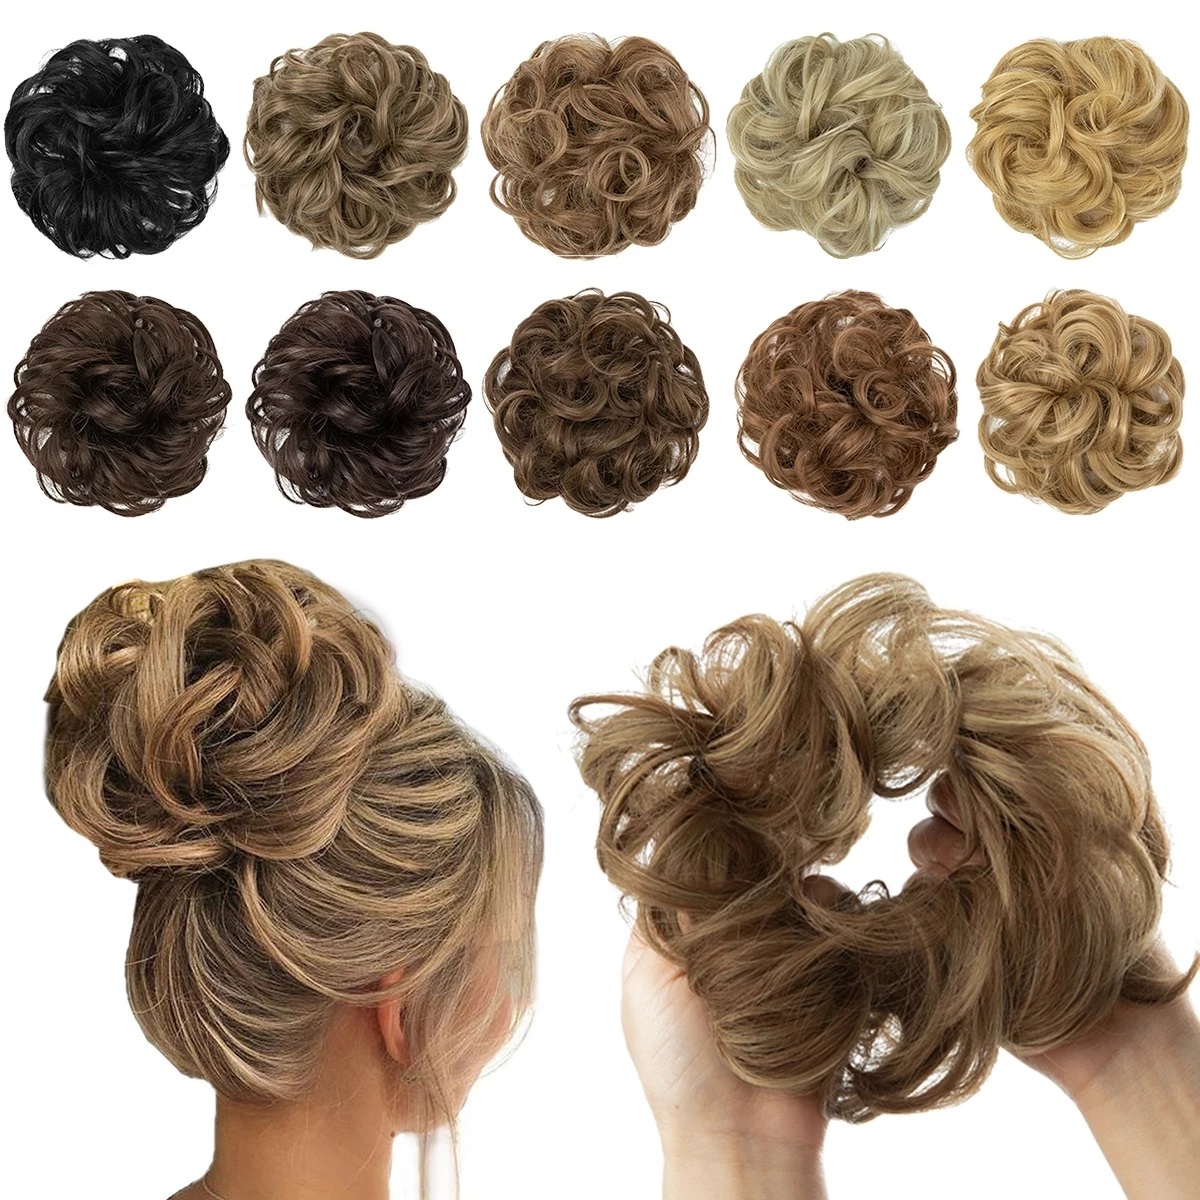 Daifeer Synthetic Hair Bun Extensions Messy Curly Elastic Hair Scrunchies Hairpieces Synthetic Chignon Donut Updo Hair Pieces for Women